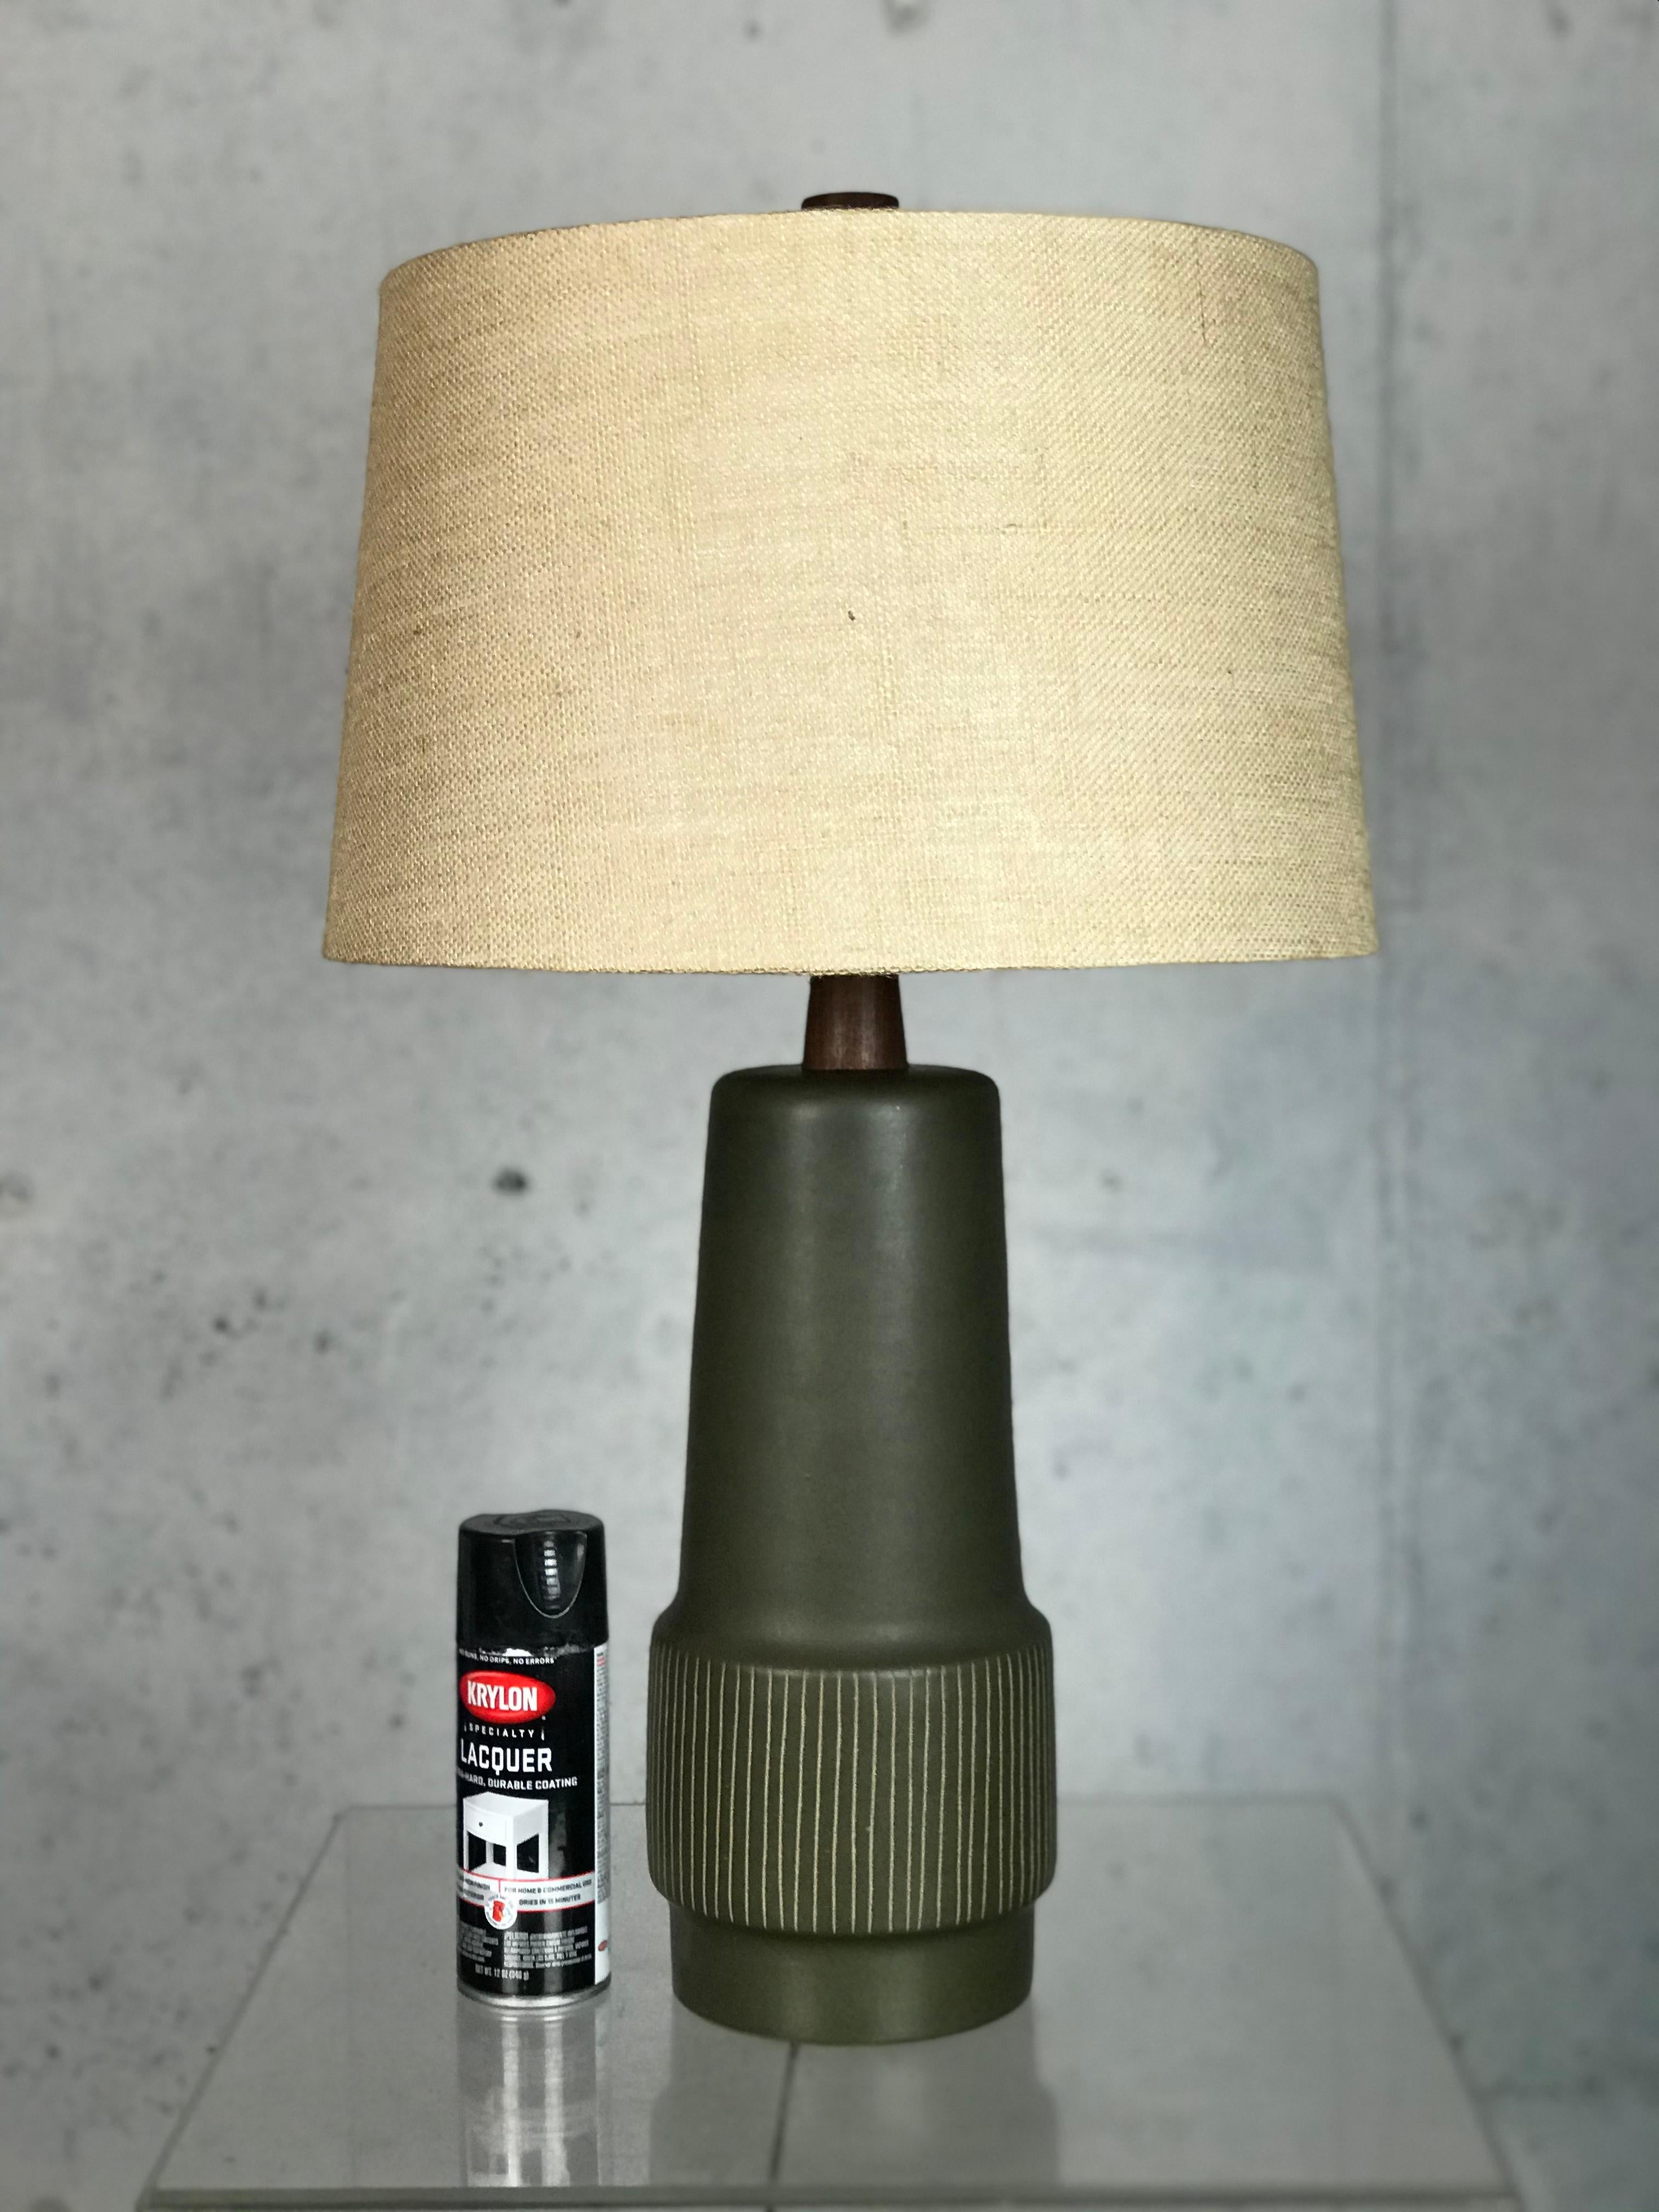 Wonderful classic Martz sgraffito ceramic lamp in tan and olive green matte glaze with a teak neck and finial. The darkness of the teak, and the style of the original wiring and harp show that this is an early model - yet looks excellent with no